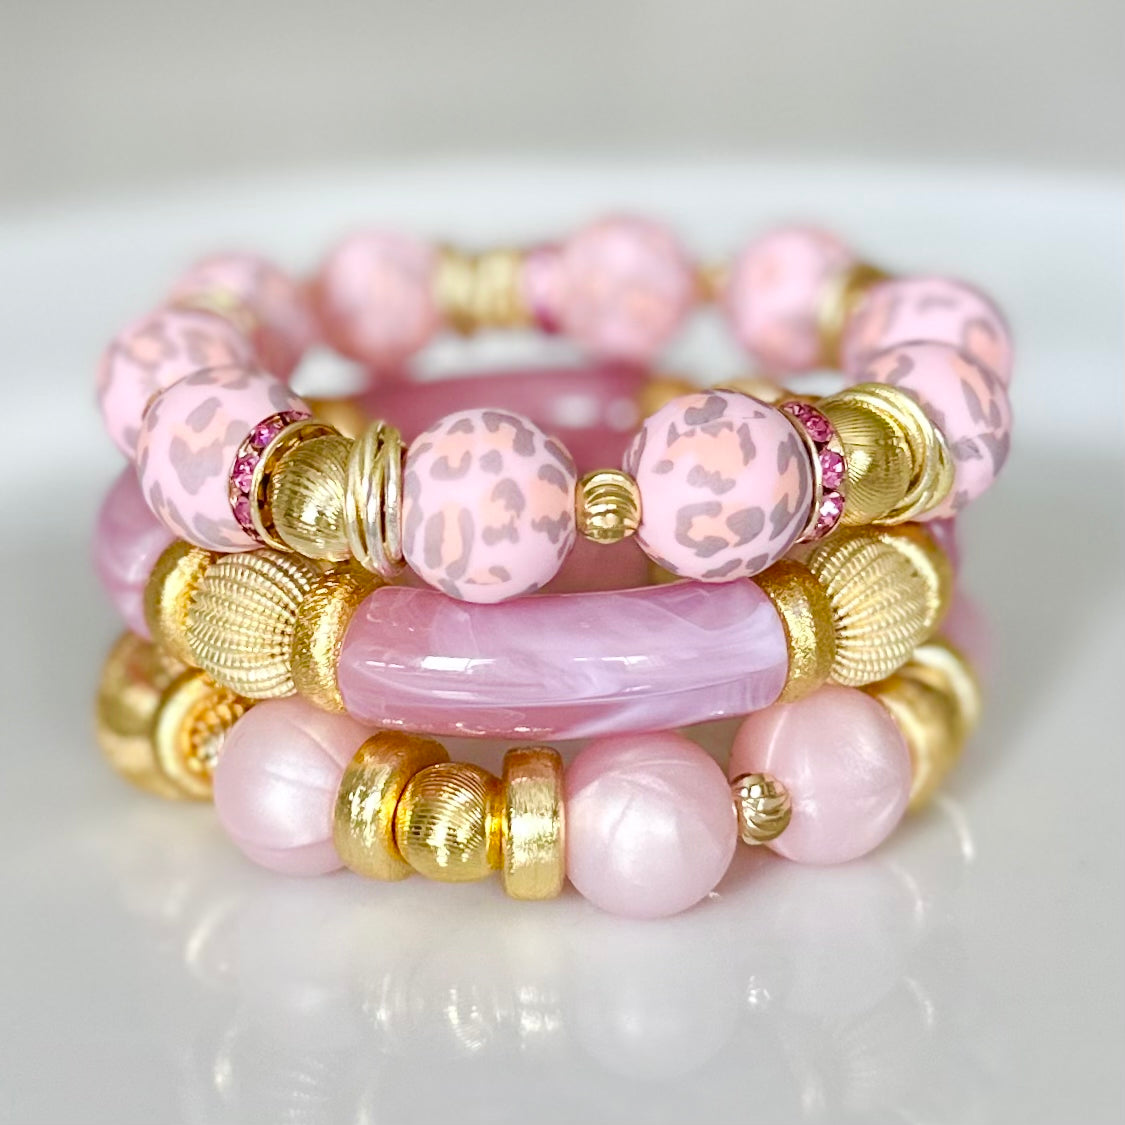 LIGHT PINK MARBLE LINK BRACELET WITH CZ ACCENTS